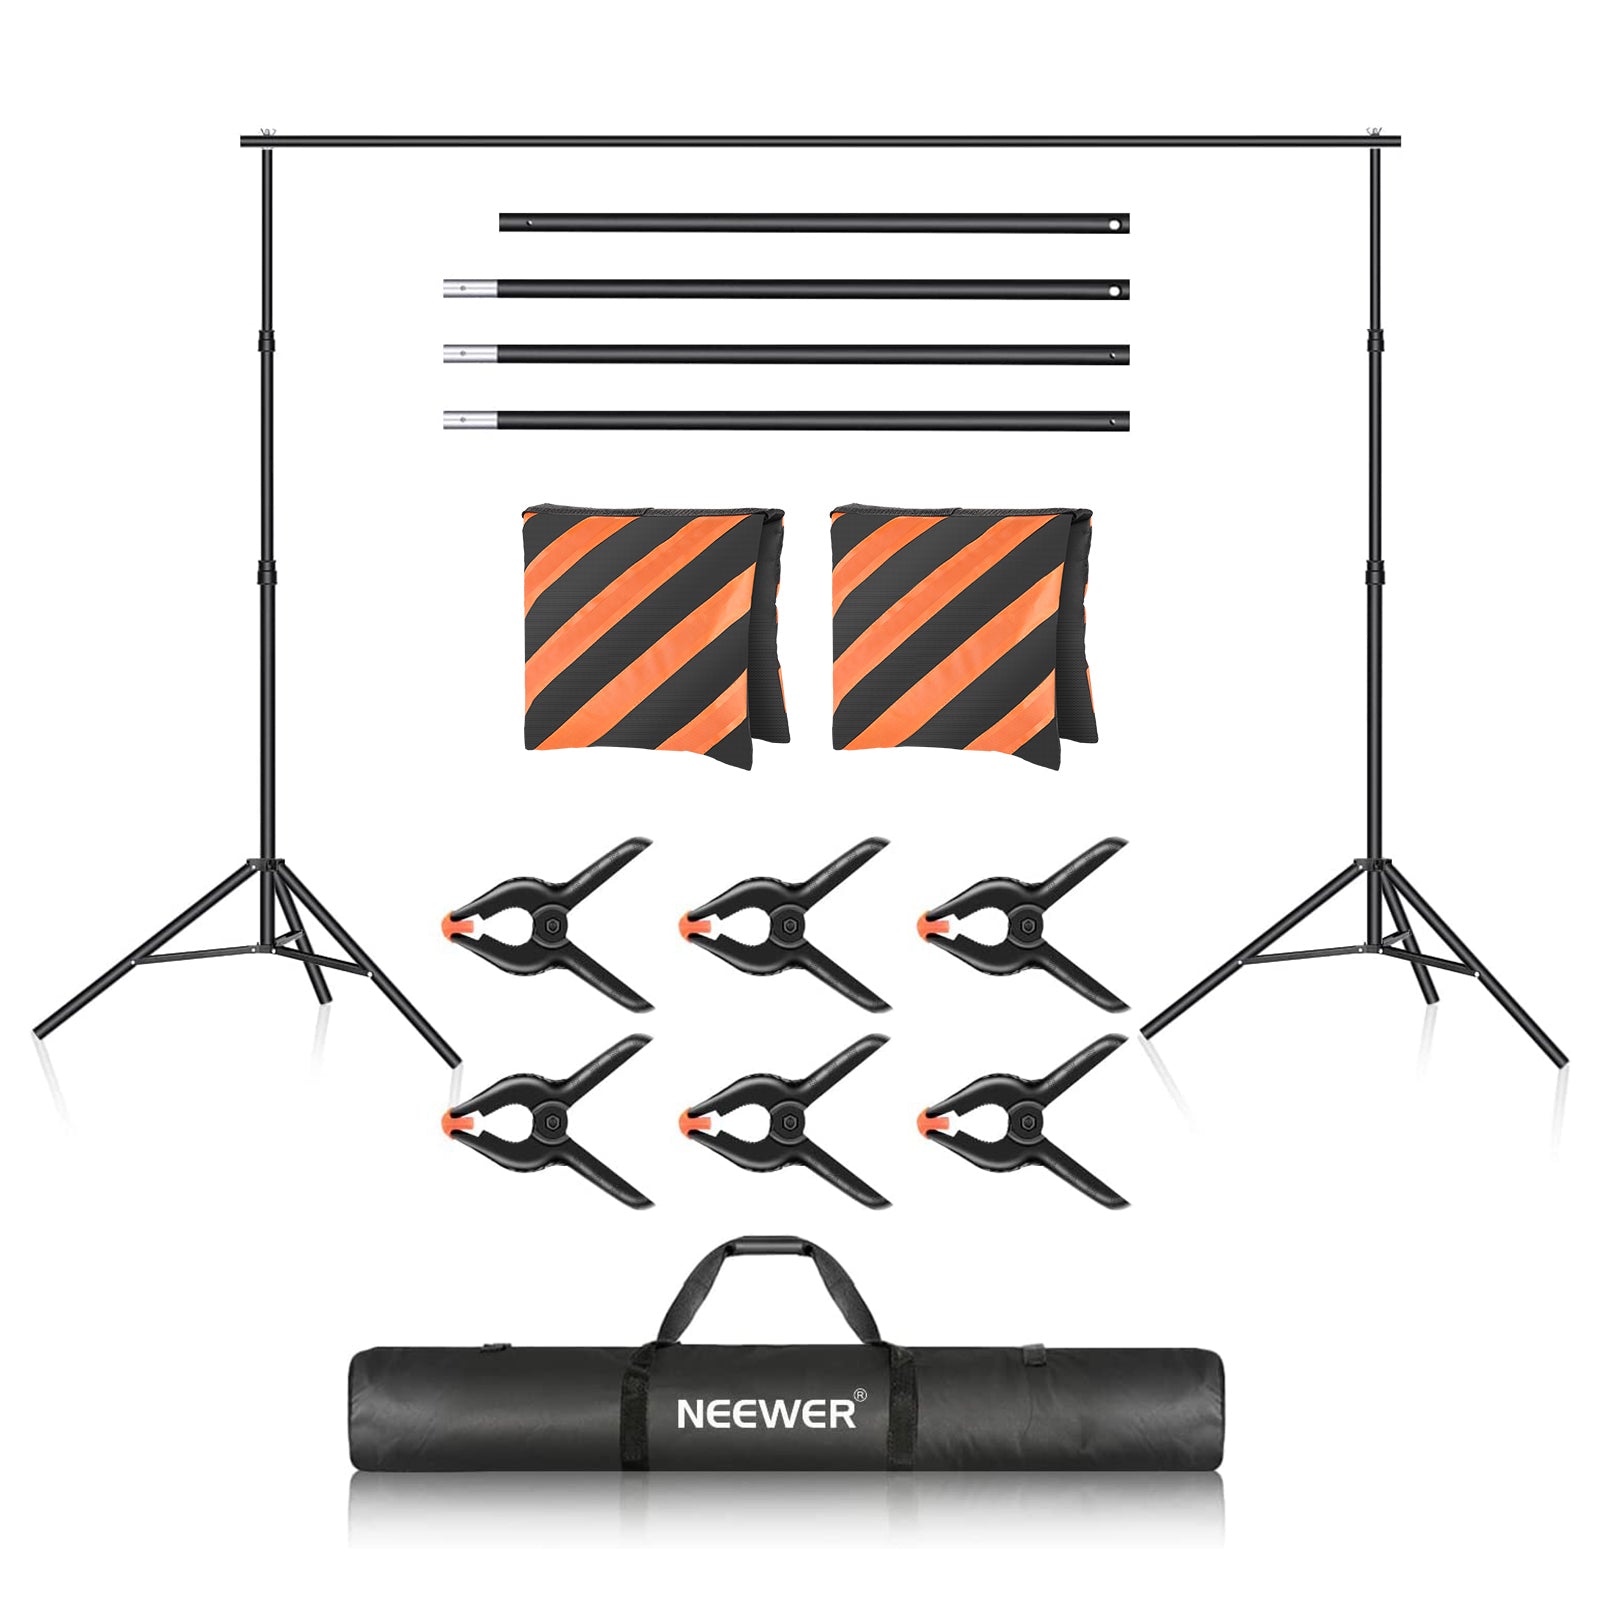 NEEWER 2 x 3M/7 x10FT Background Support System - NEEWER